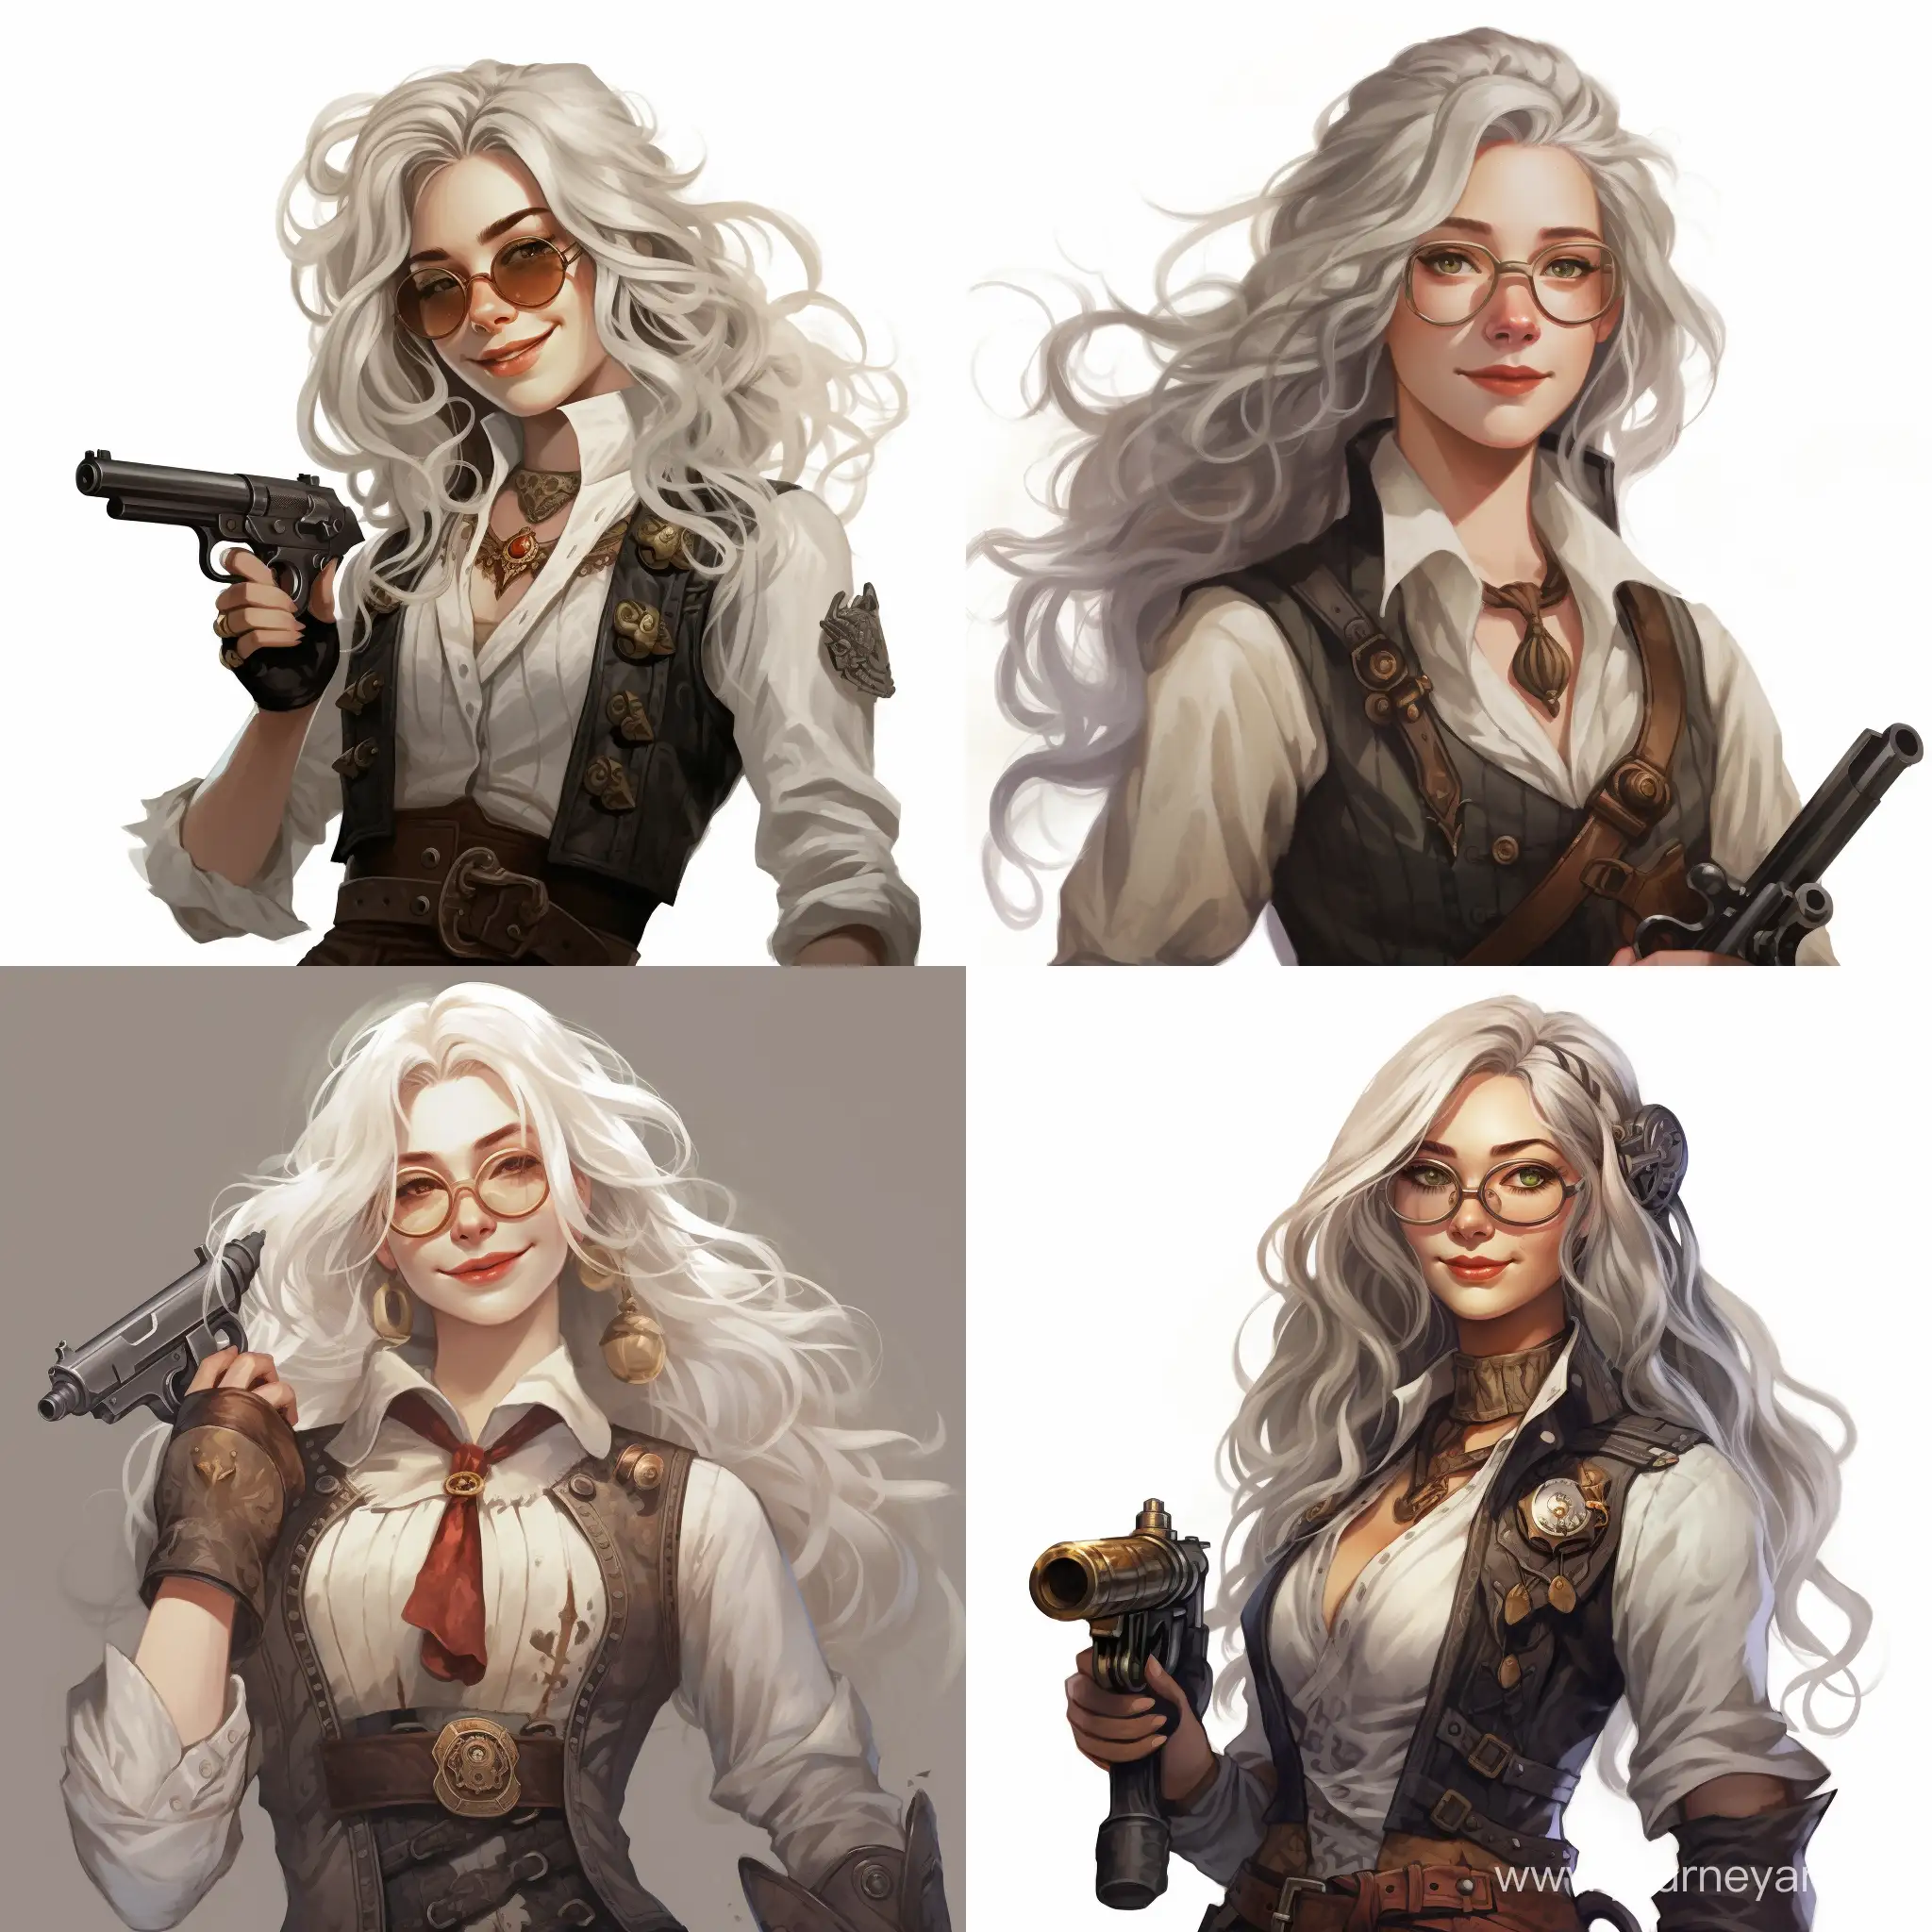 white long hair, woman, 20 years old, steampunk style, holding revolver in one hand, round glasses, smiling